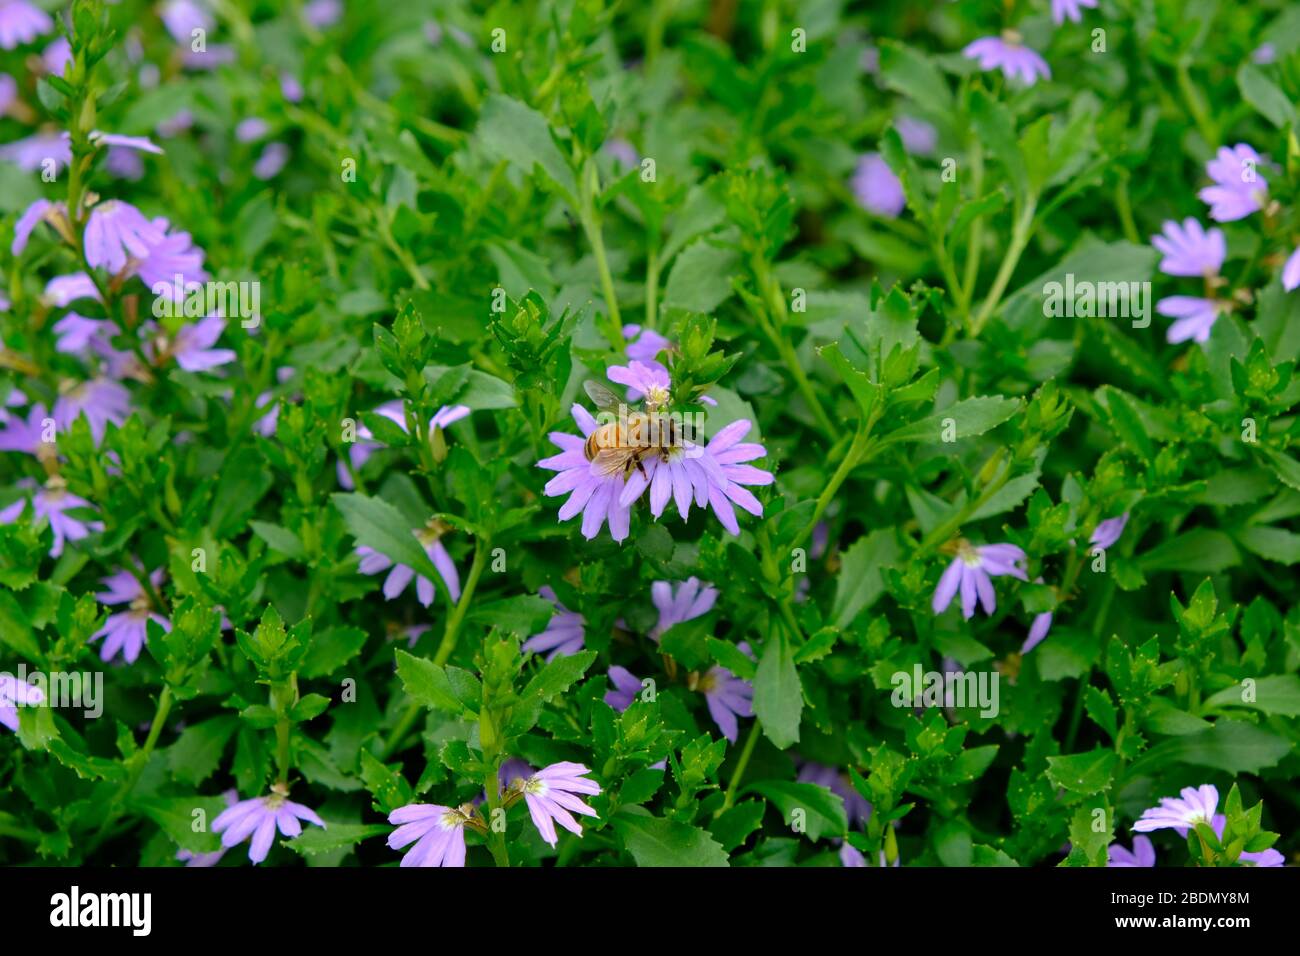 Mauve Scaevola flowers surrounded by the leaves of the plant. With a single honey bee. Stock Photo